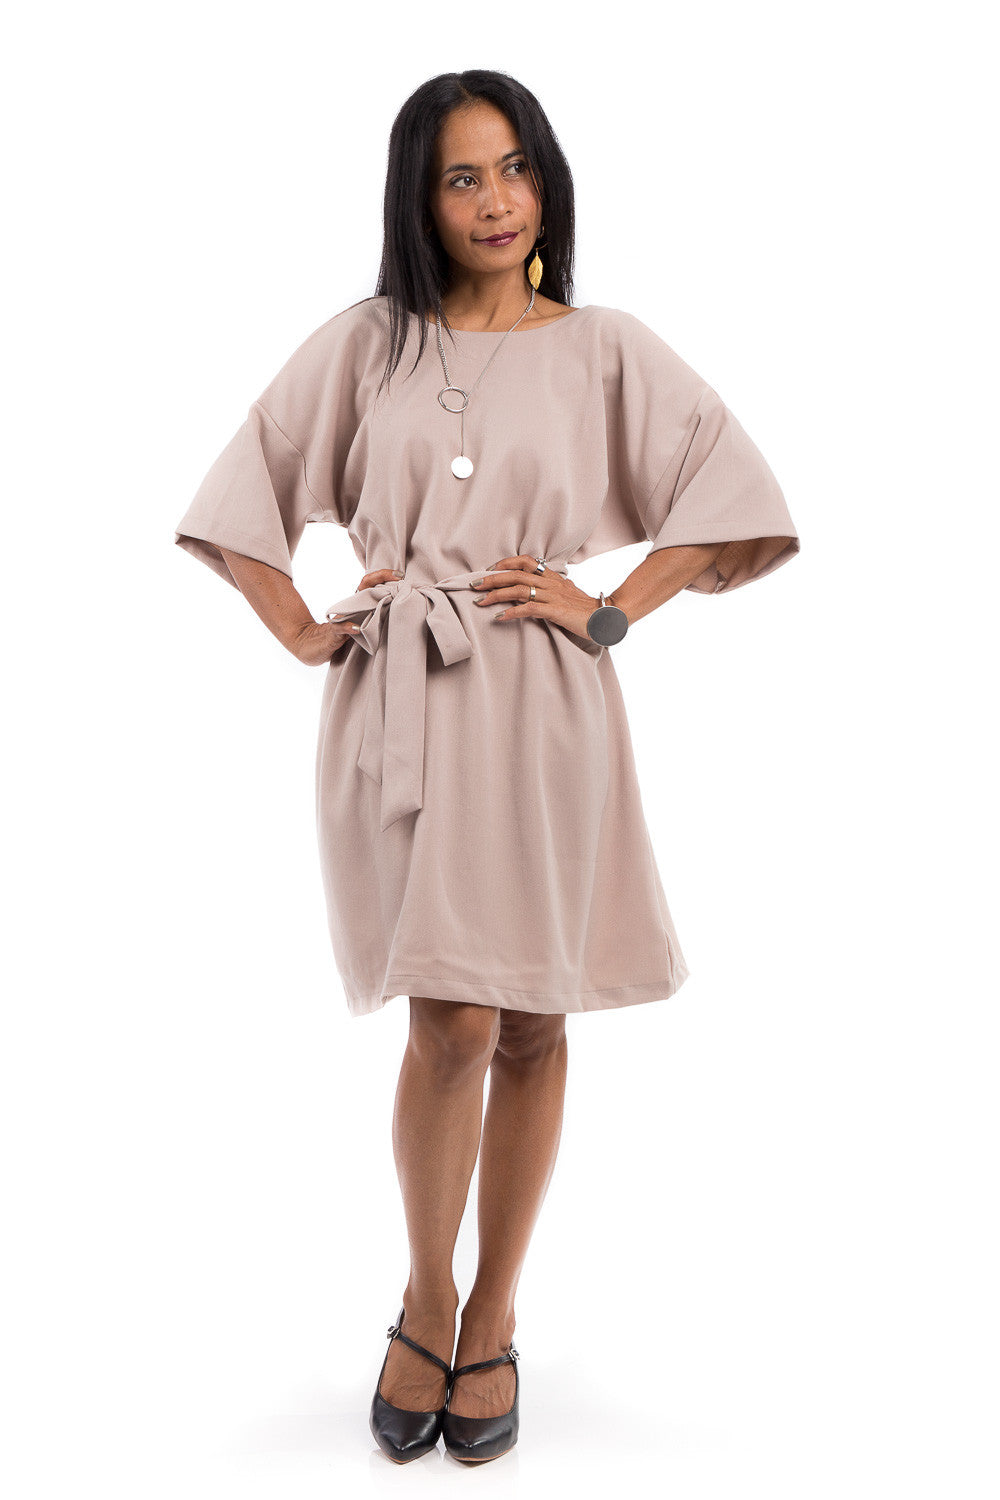 Short summer dress with half length sleeves.  Modest neckline with waistband accent.  Above the knee length dress.